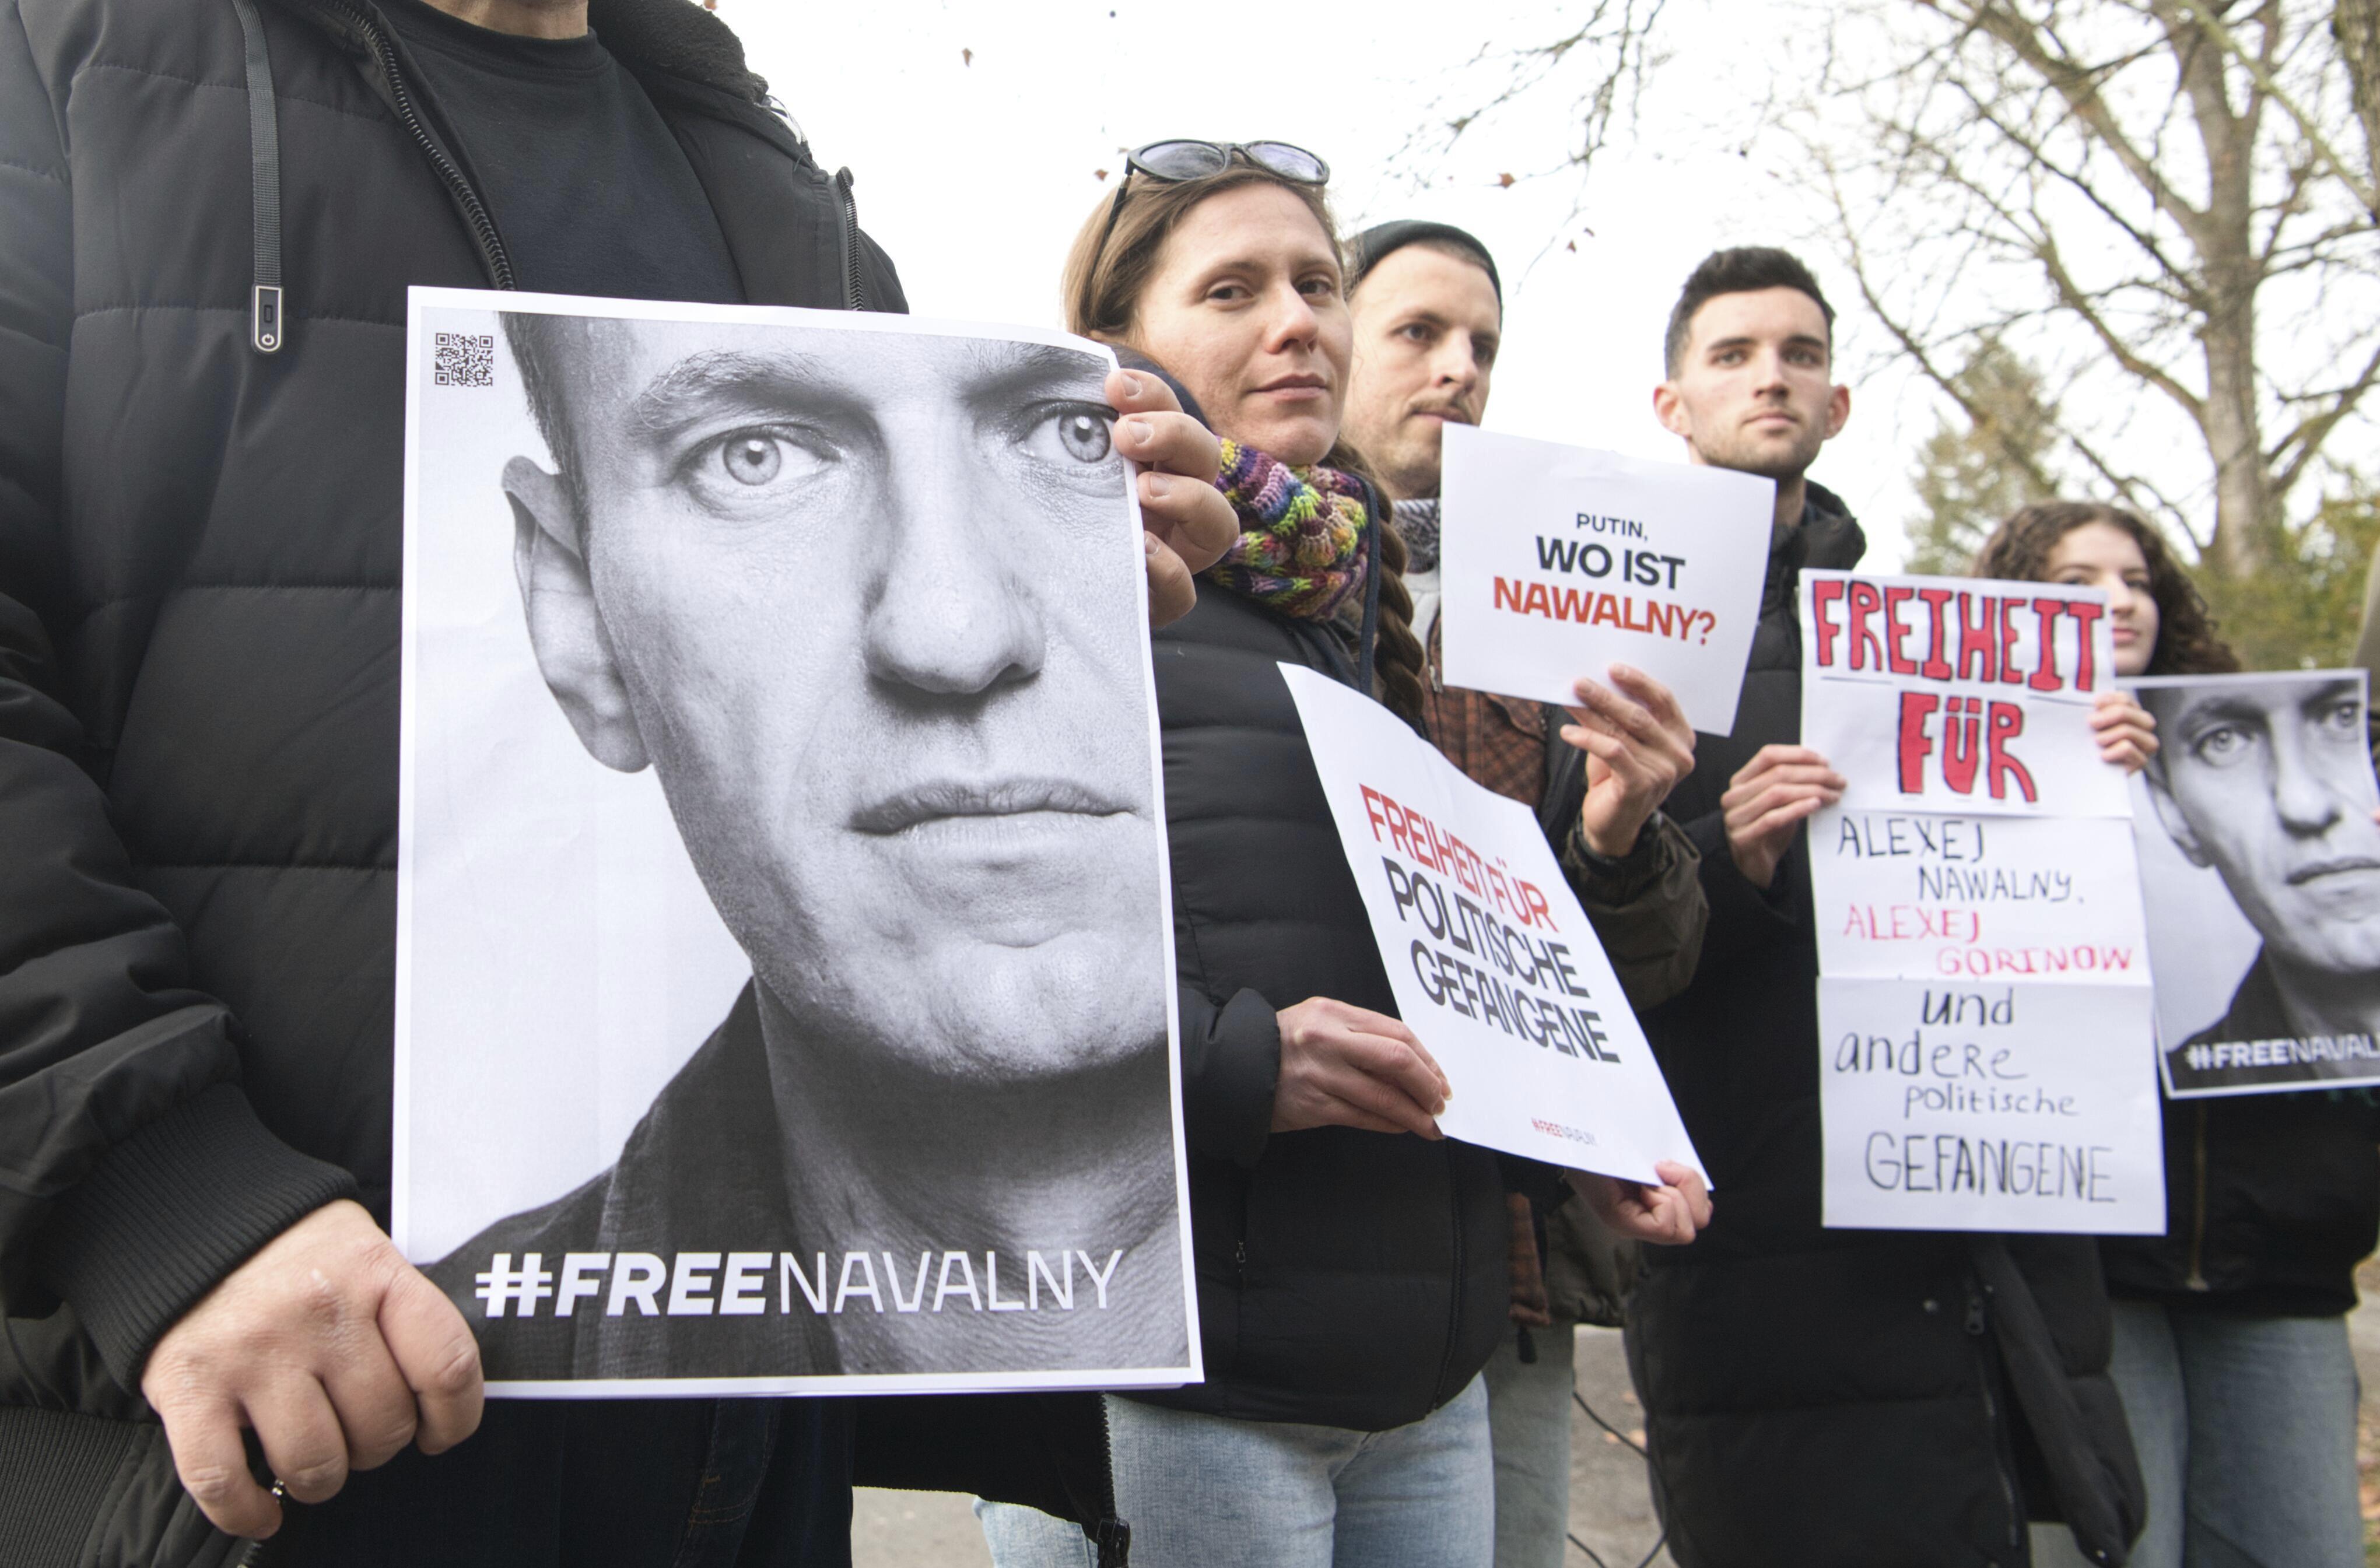 Protesters gathered in December after his weeks-long disappearance from his prison cell